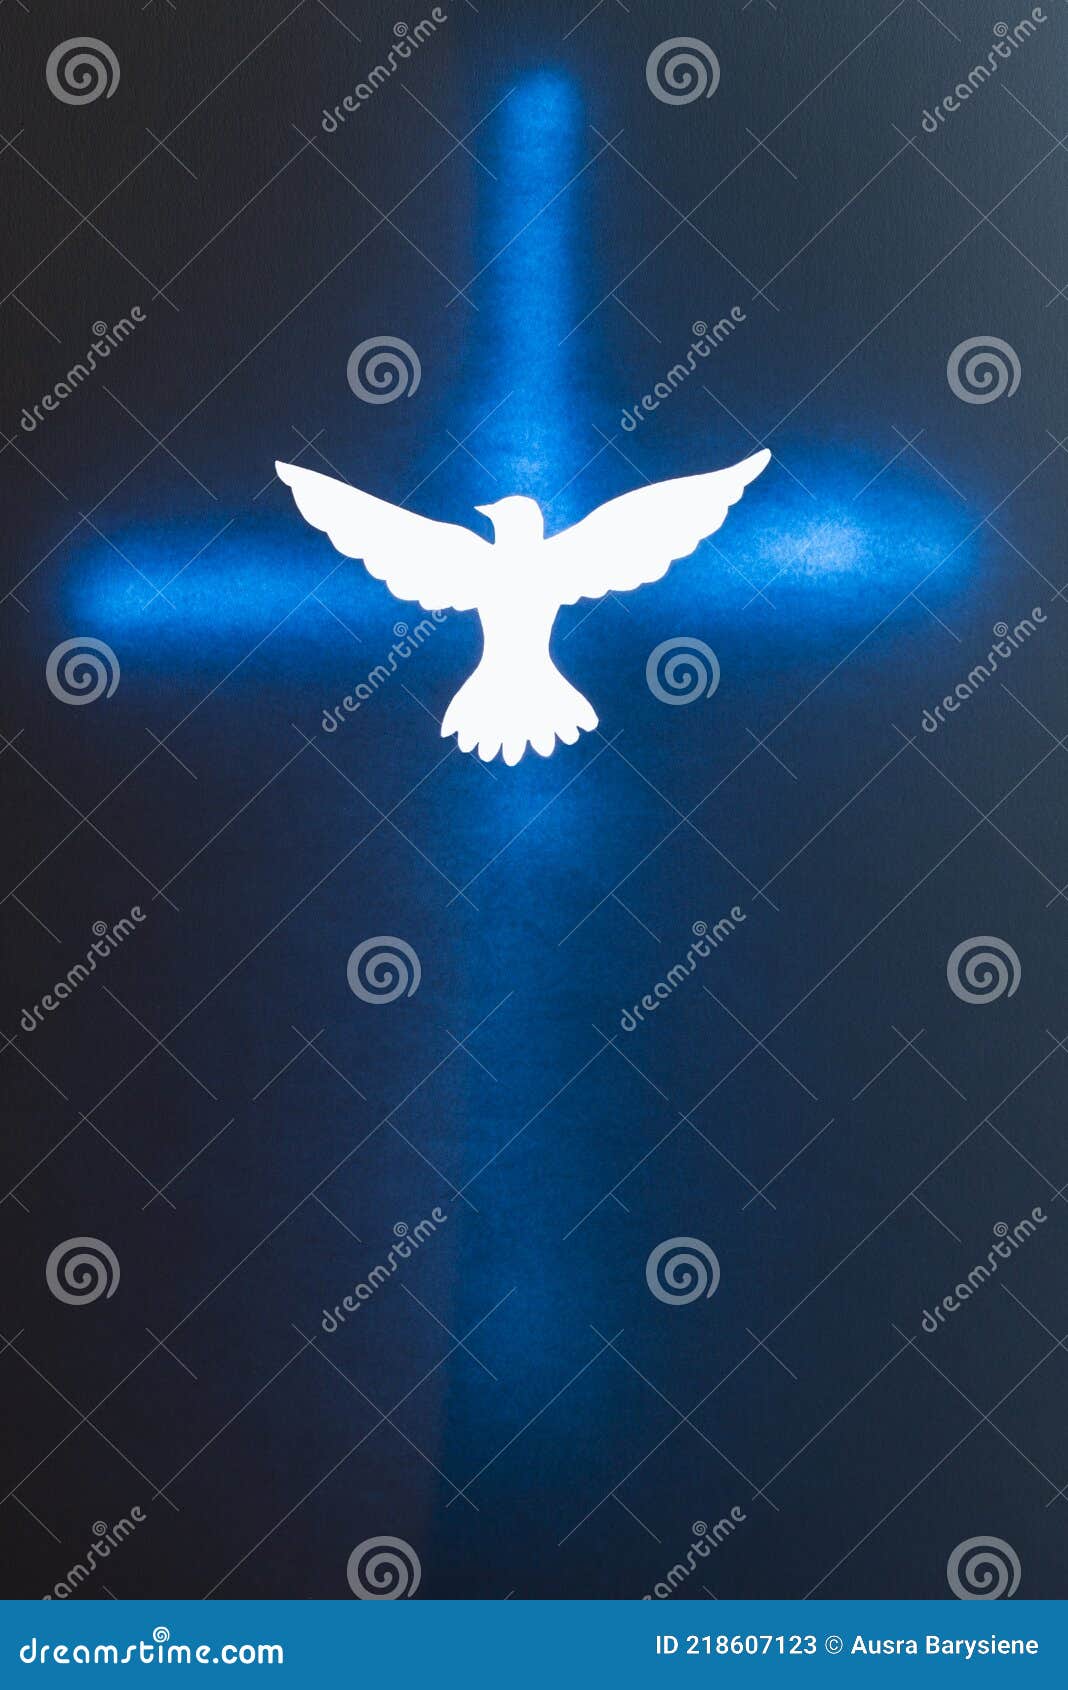 White Dove Silhouette Over a Shining Cross Stock Image - Image of ...